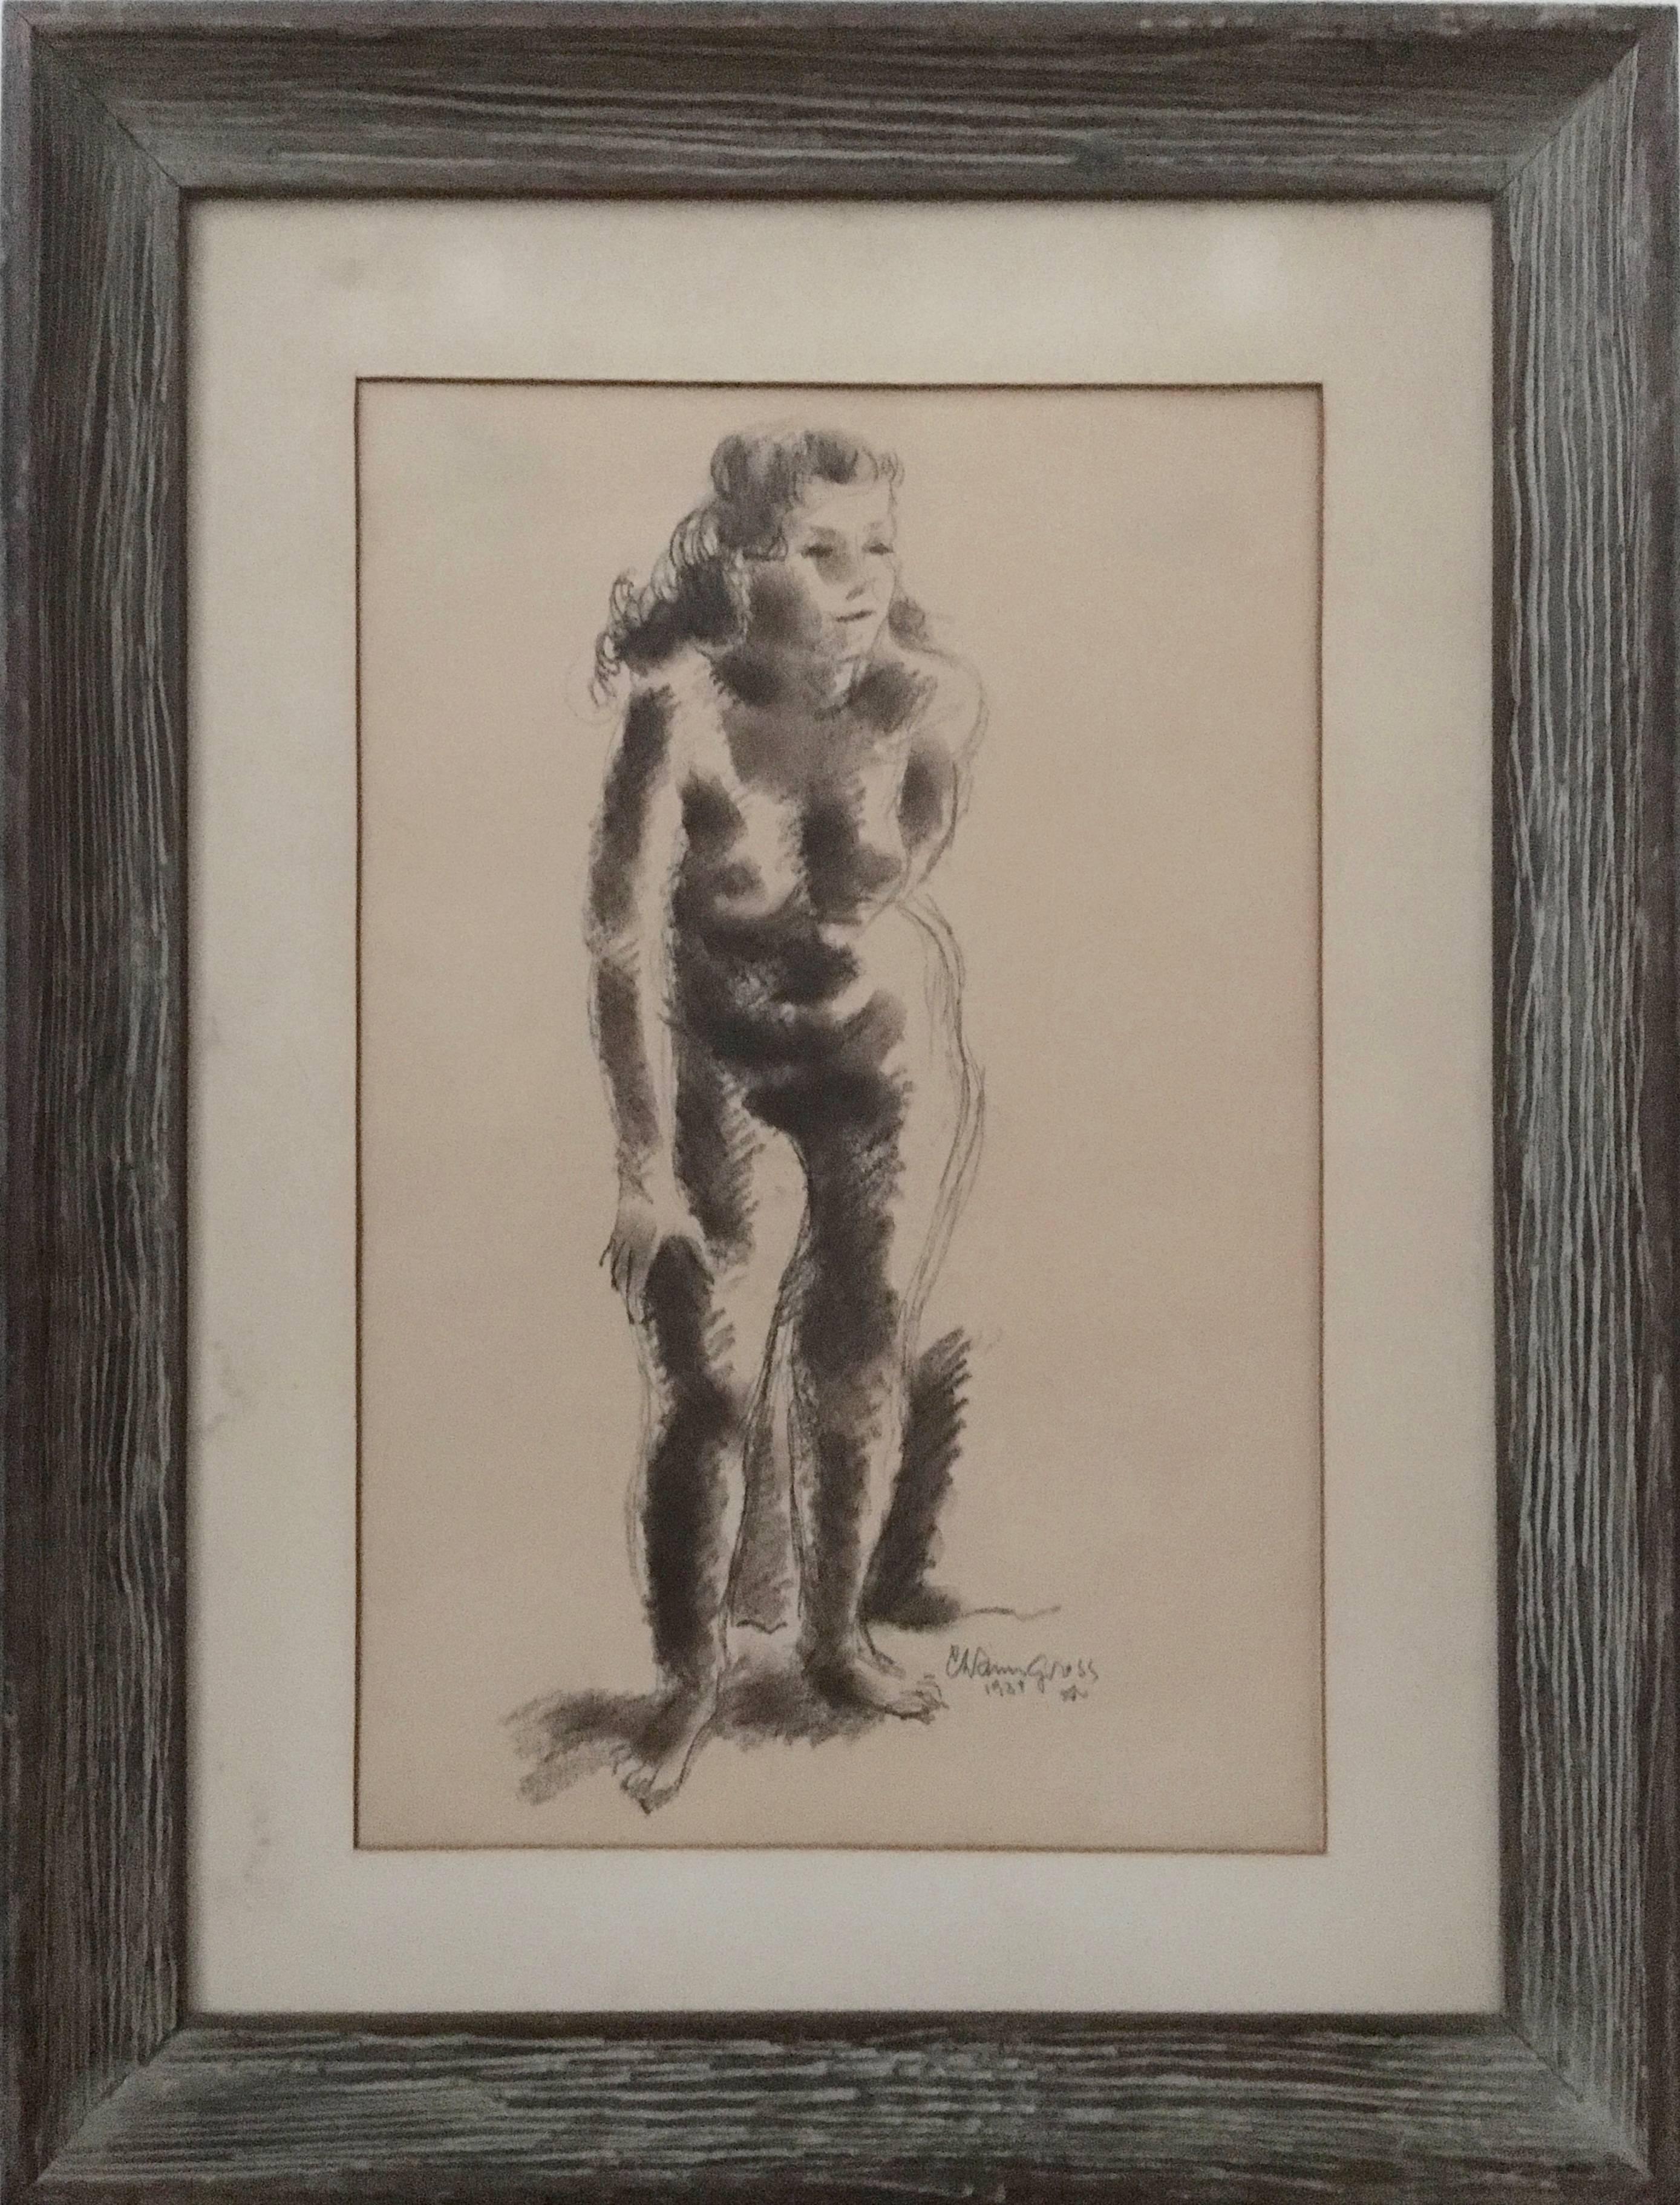 Rare Early Nude Drawing American Modernist Sculptor  - Art by Chaim Gross